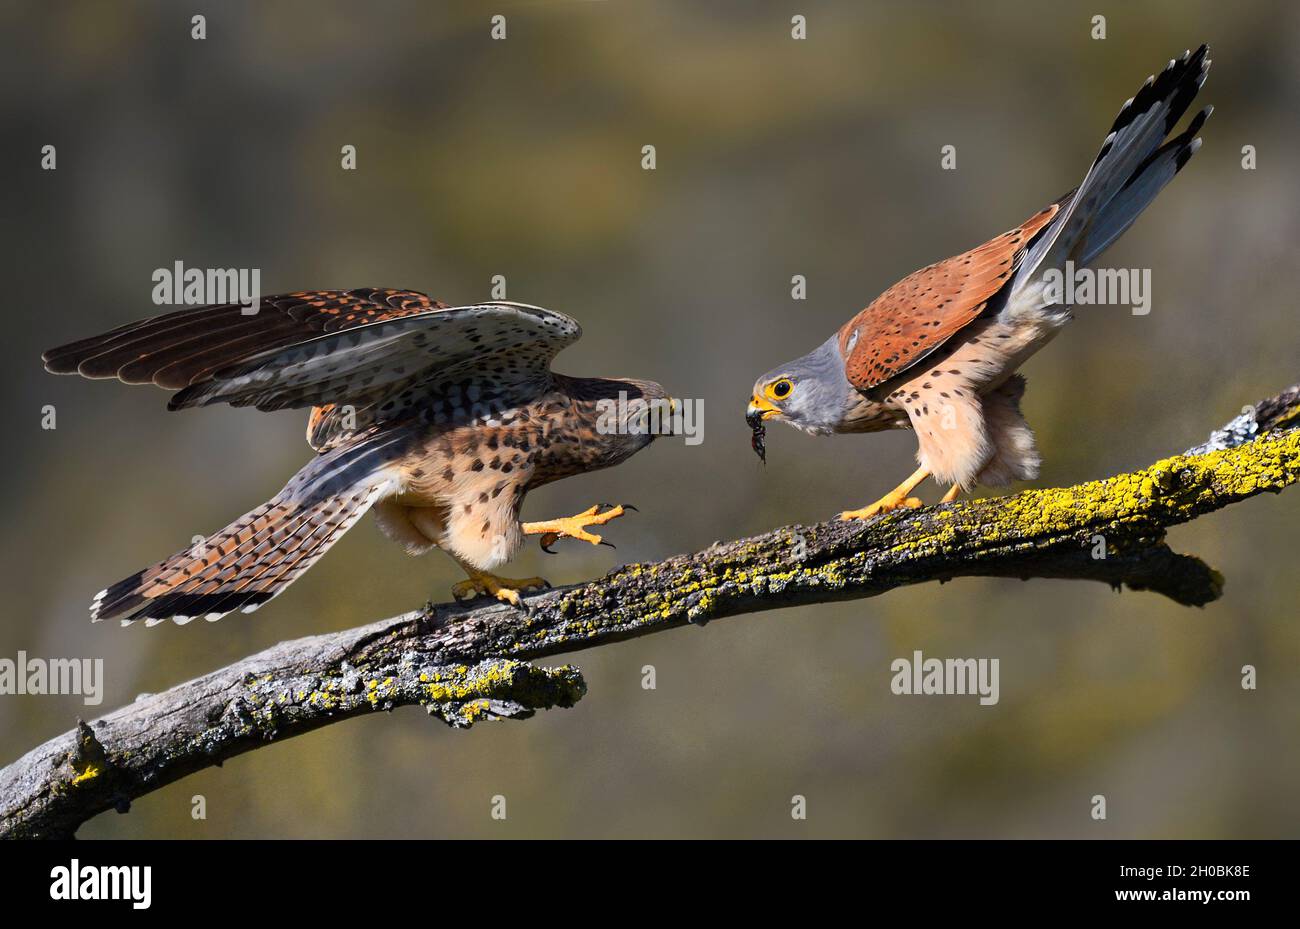 Kestrel (Falco tinnunculus) offering a cricket to the female during courtship, Vosges du Nord Regional Nature Park, France Stock Photo